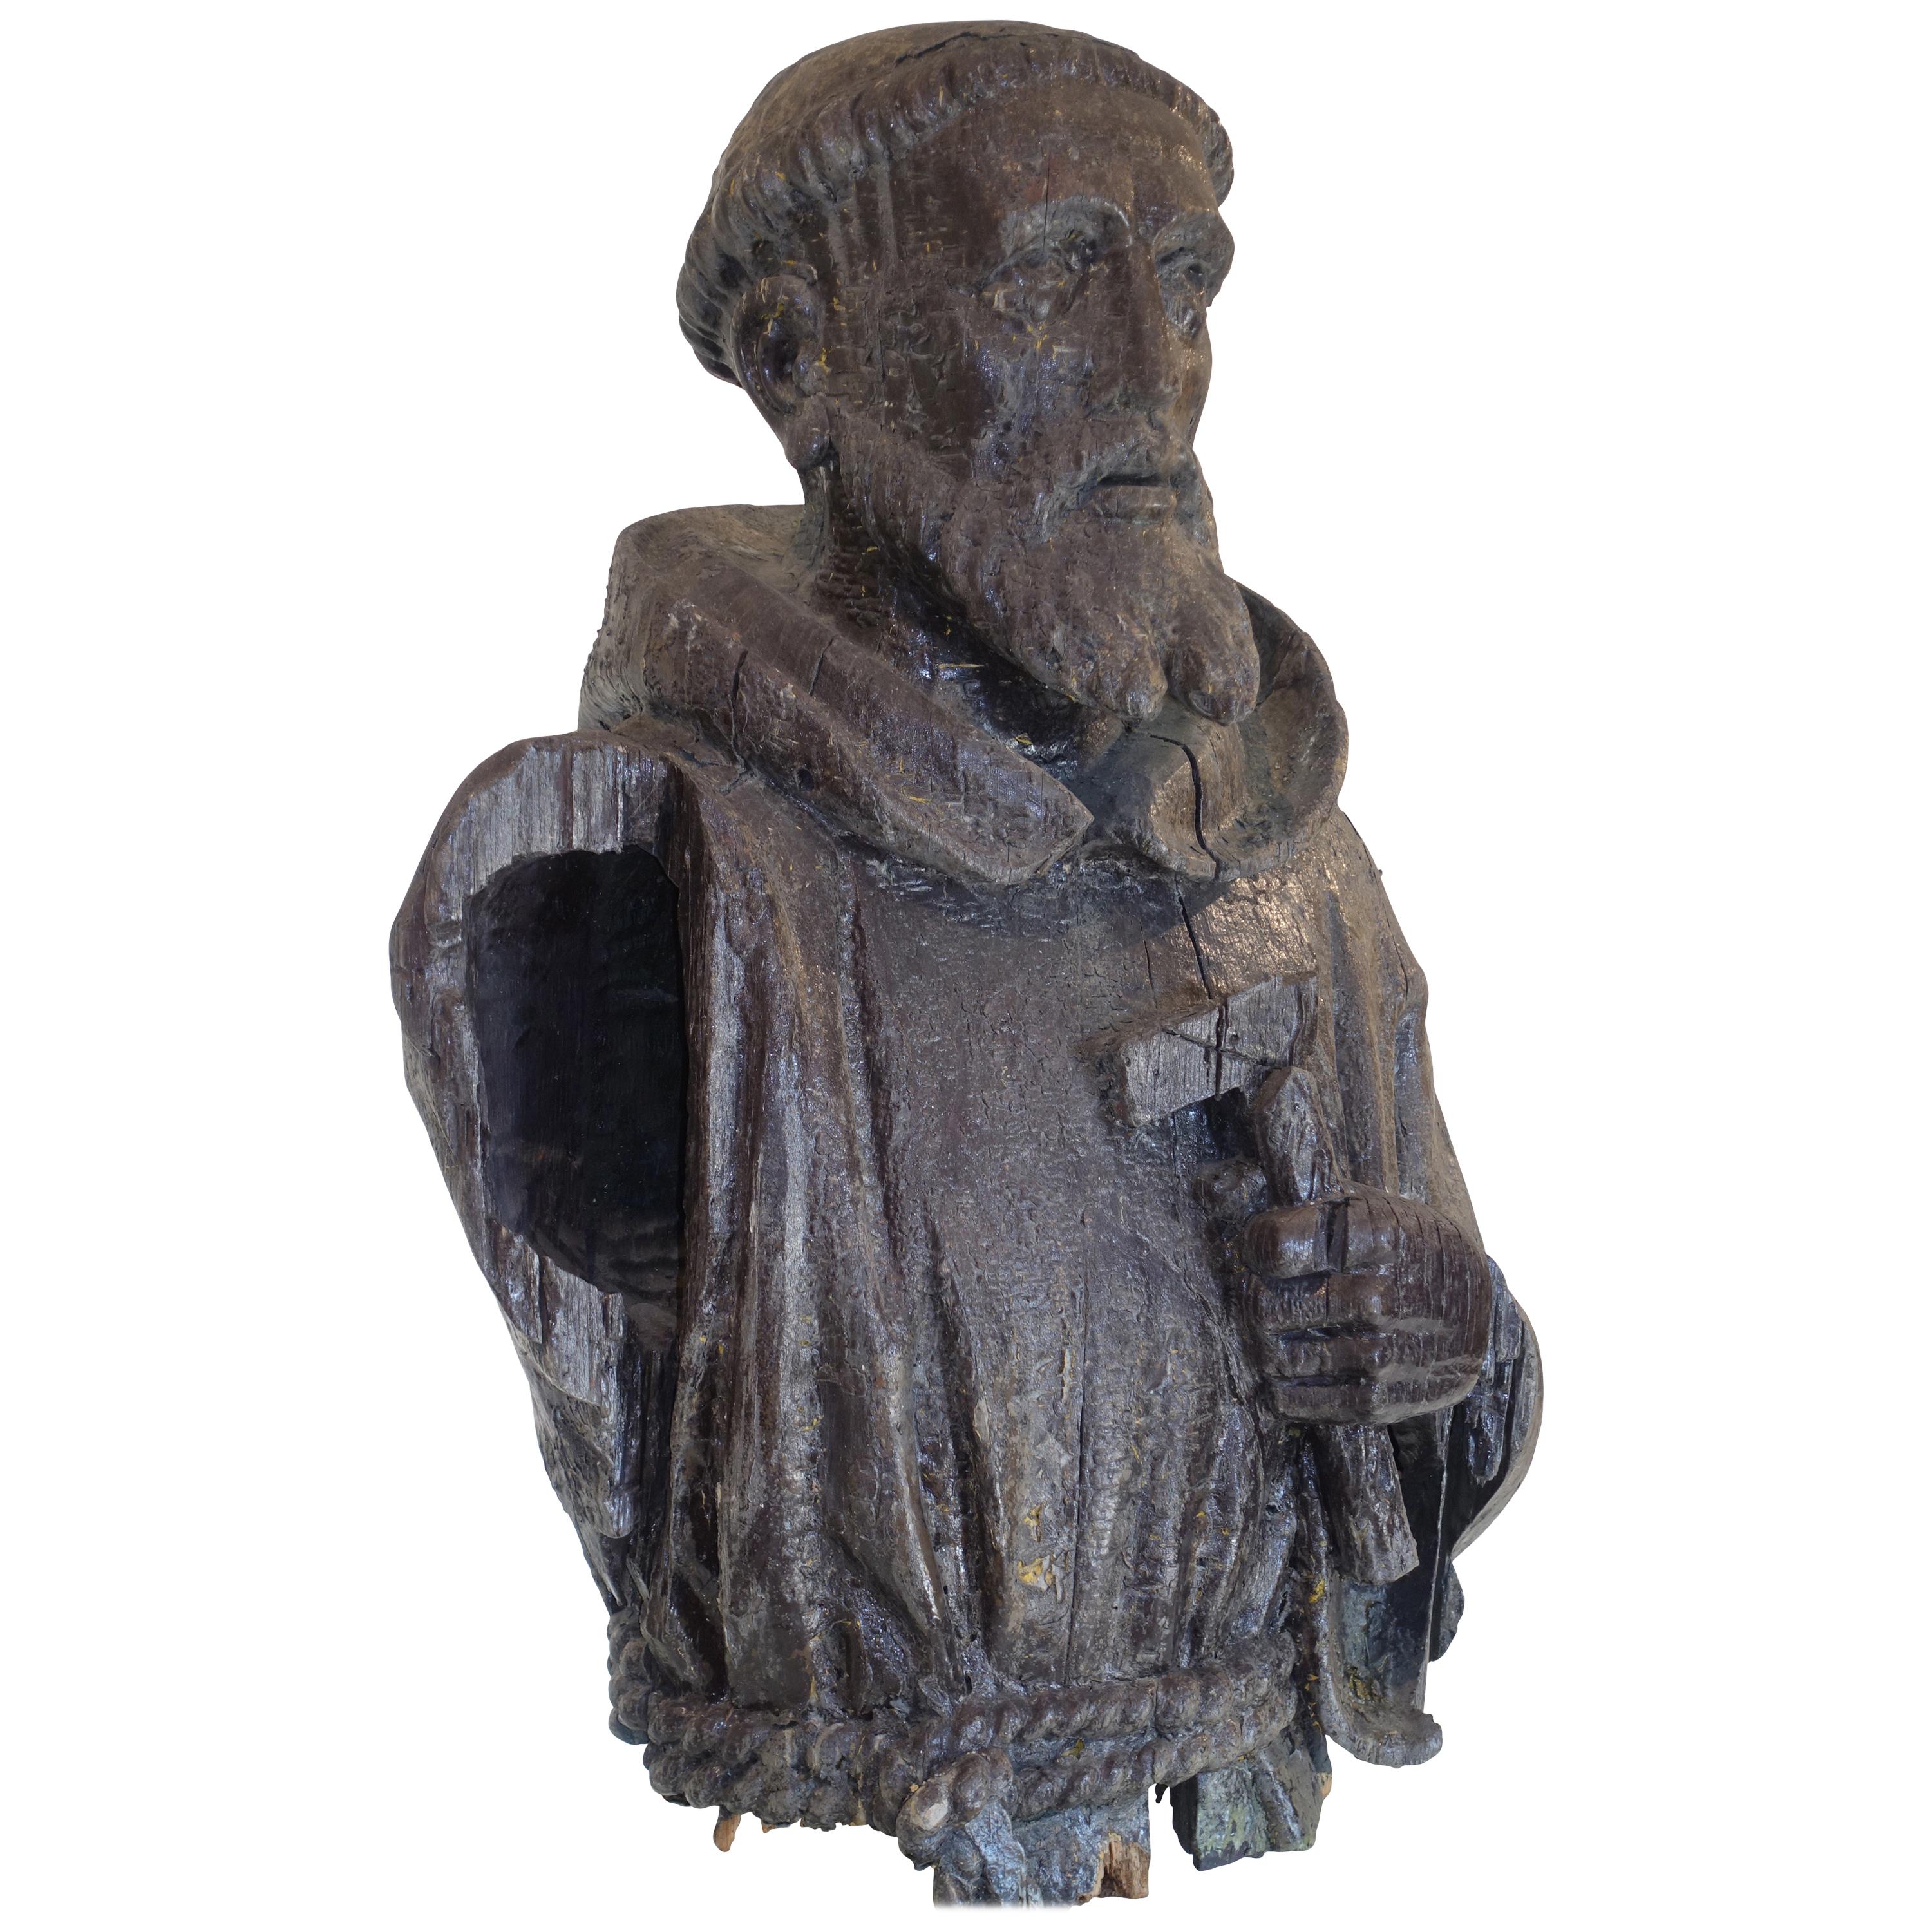 18th Century larger than Life-Size Carved and Painted Bust of Saint Francis